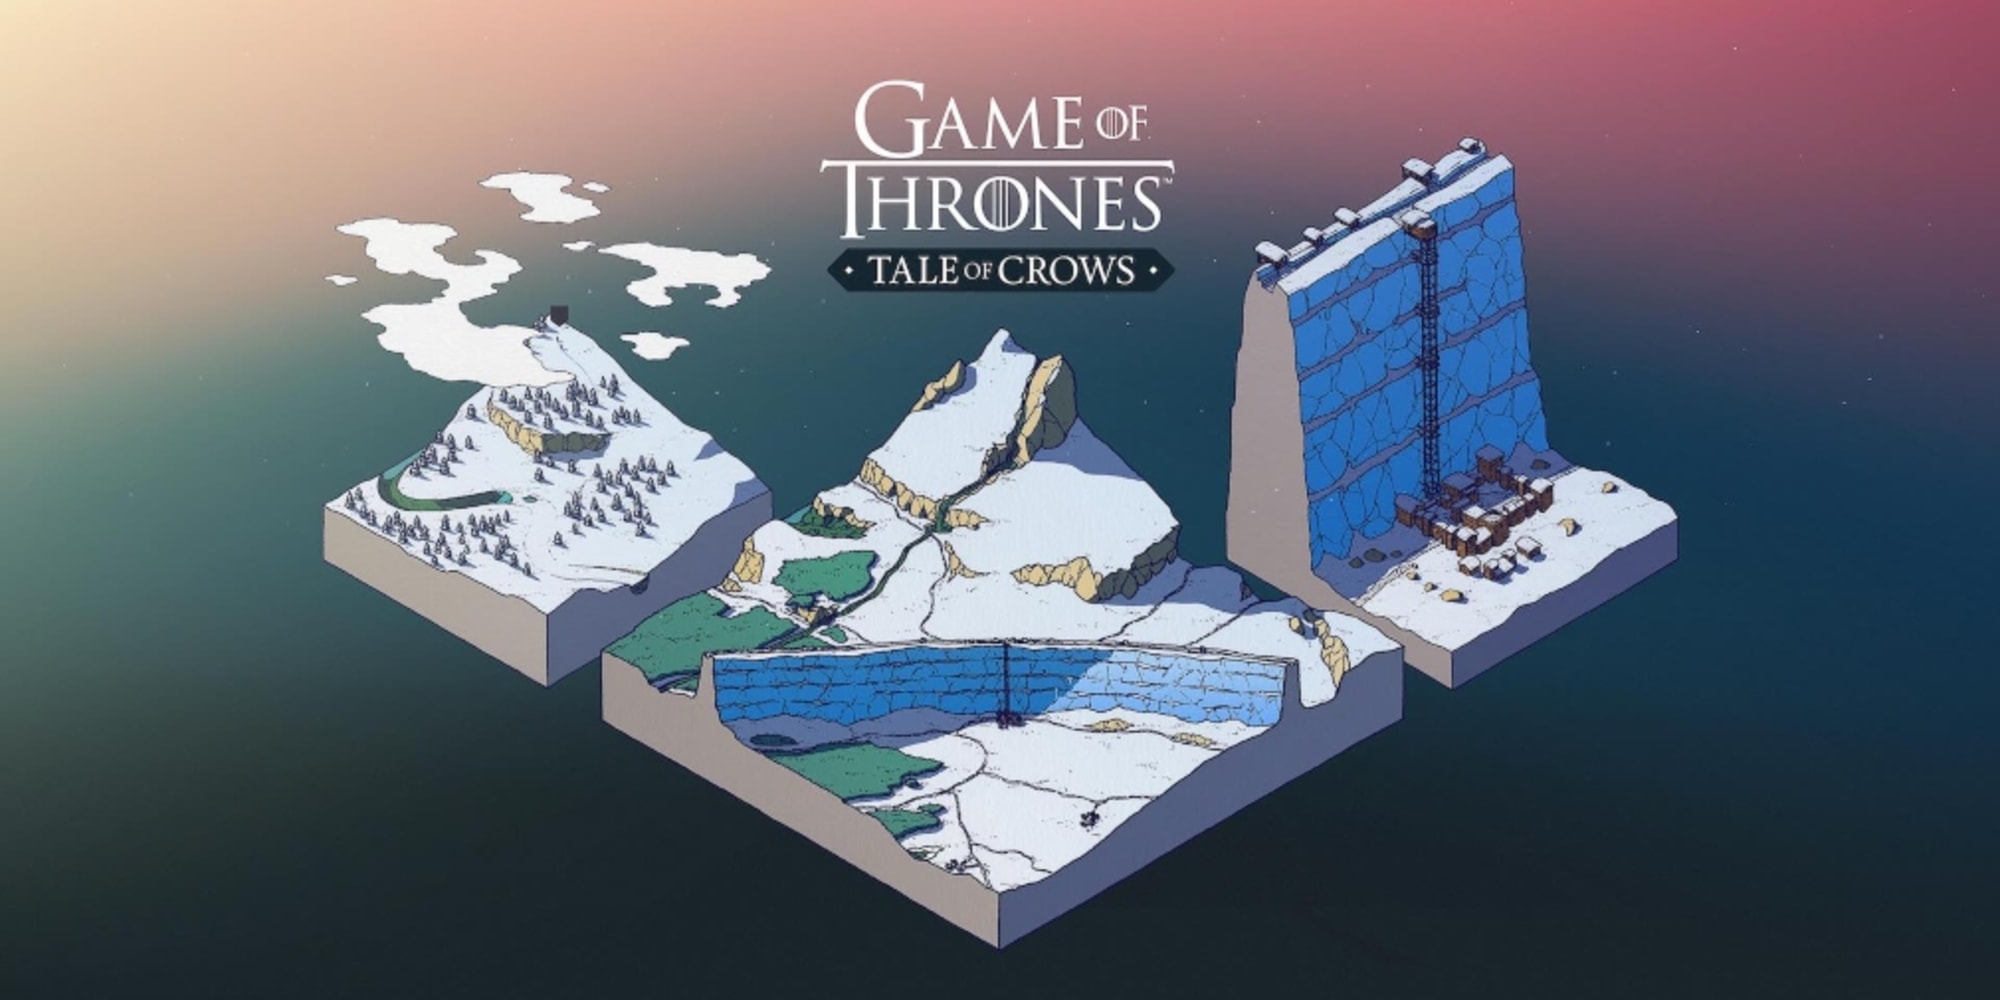 Check out Game of Thrones: Tale of Crows on Apple Arcade